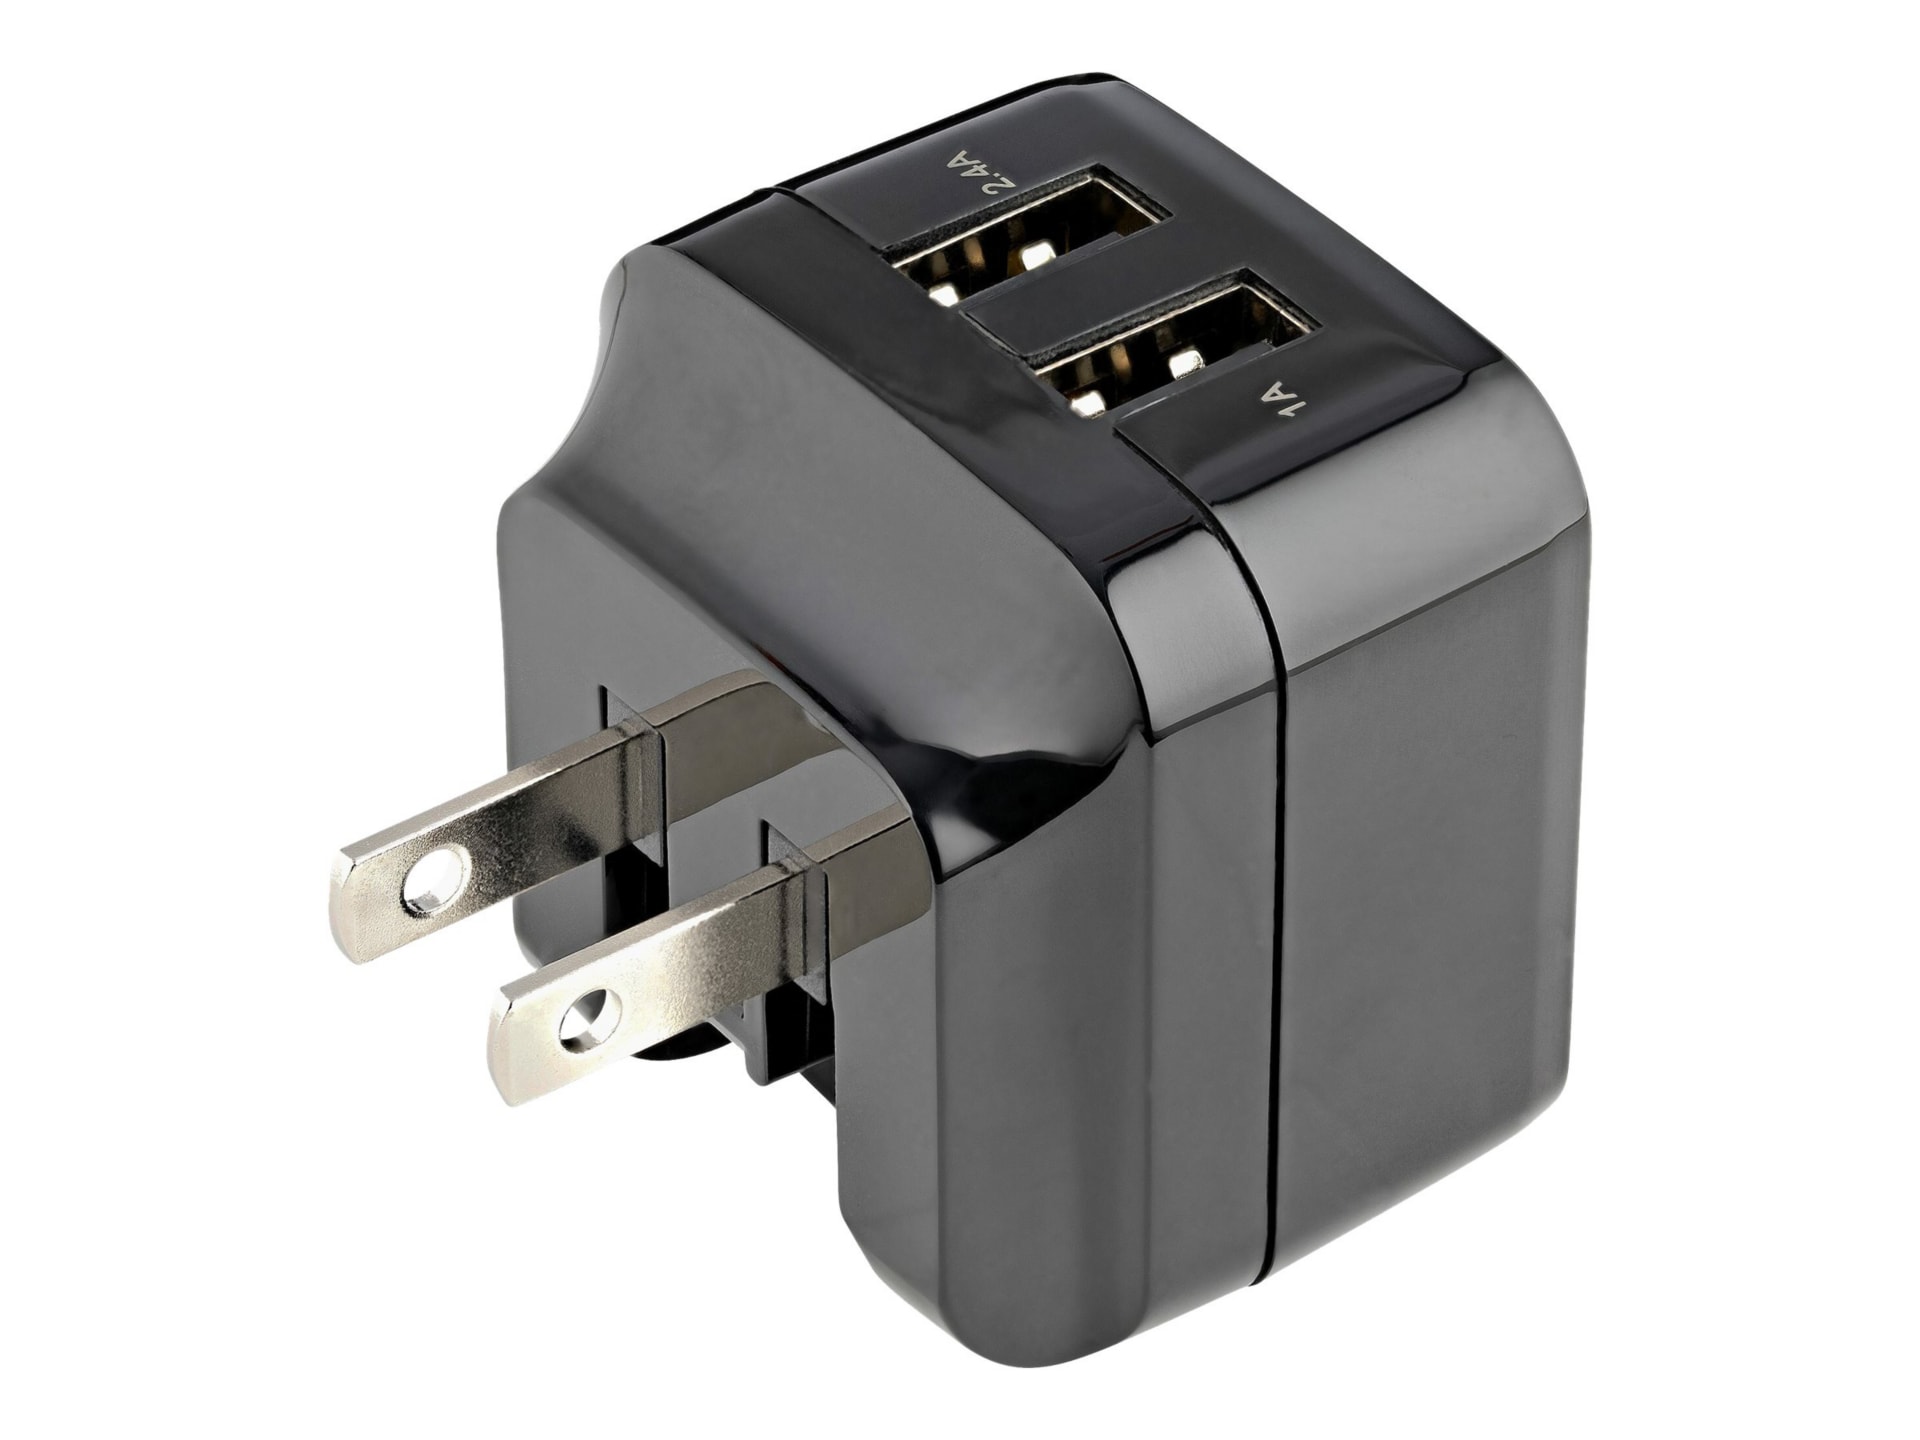 StarTech.com 2 Port USB Wall Charger, 17W Wall Charger Hub (2.4A & 1A port), Dual USB-A Power Adapter, Portable Charger